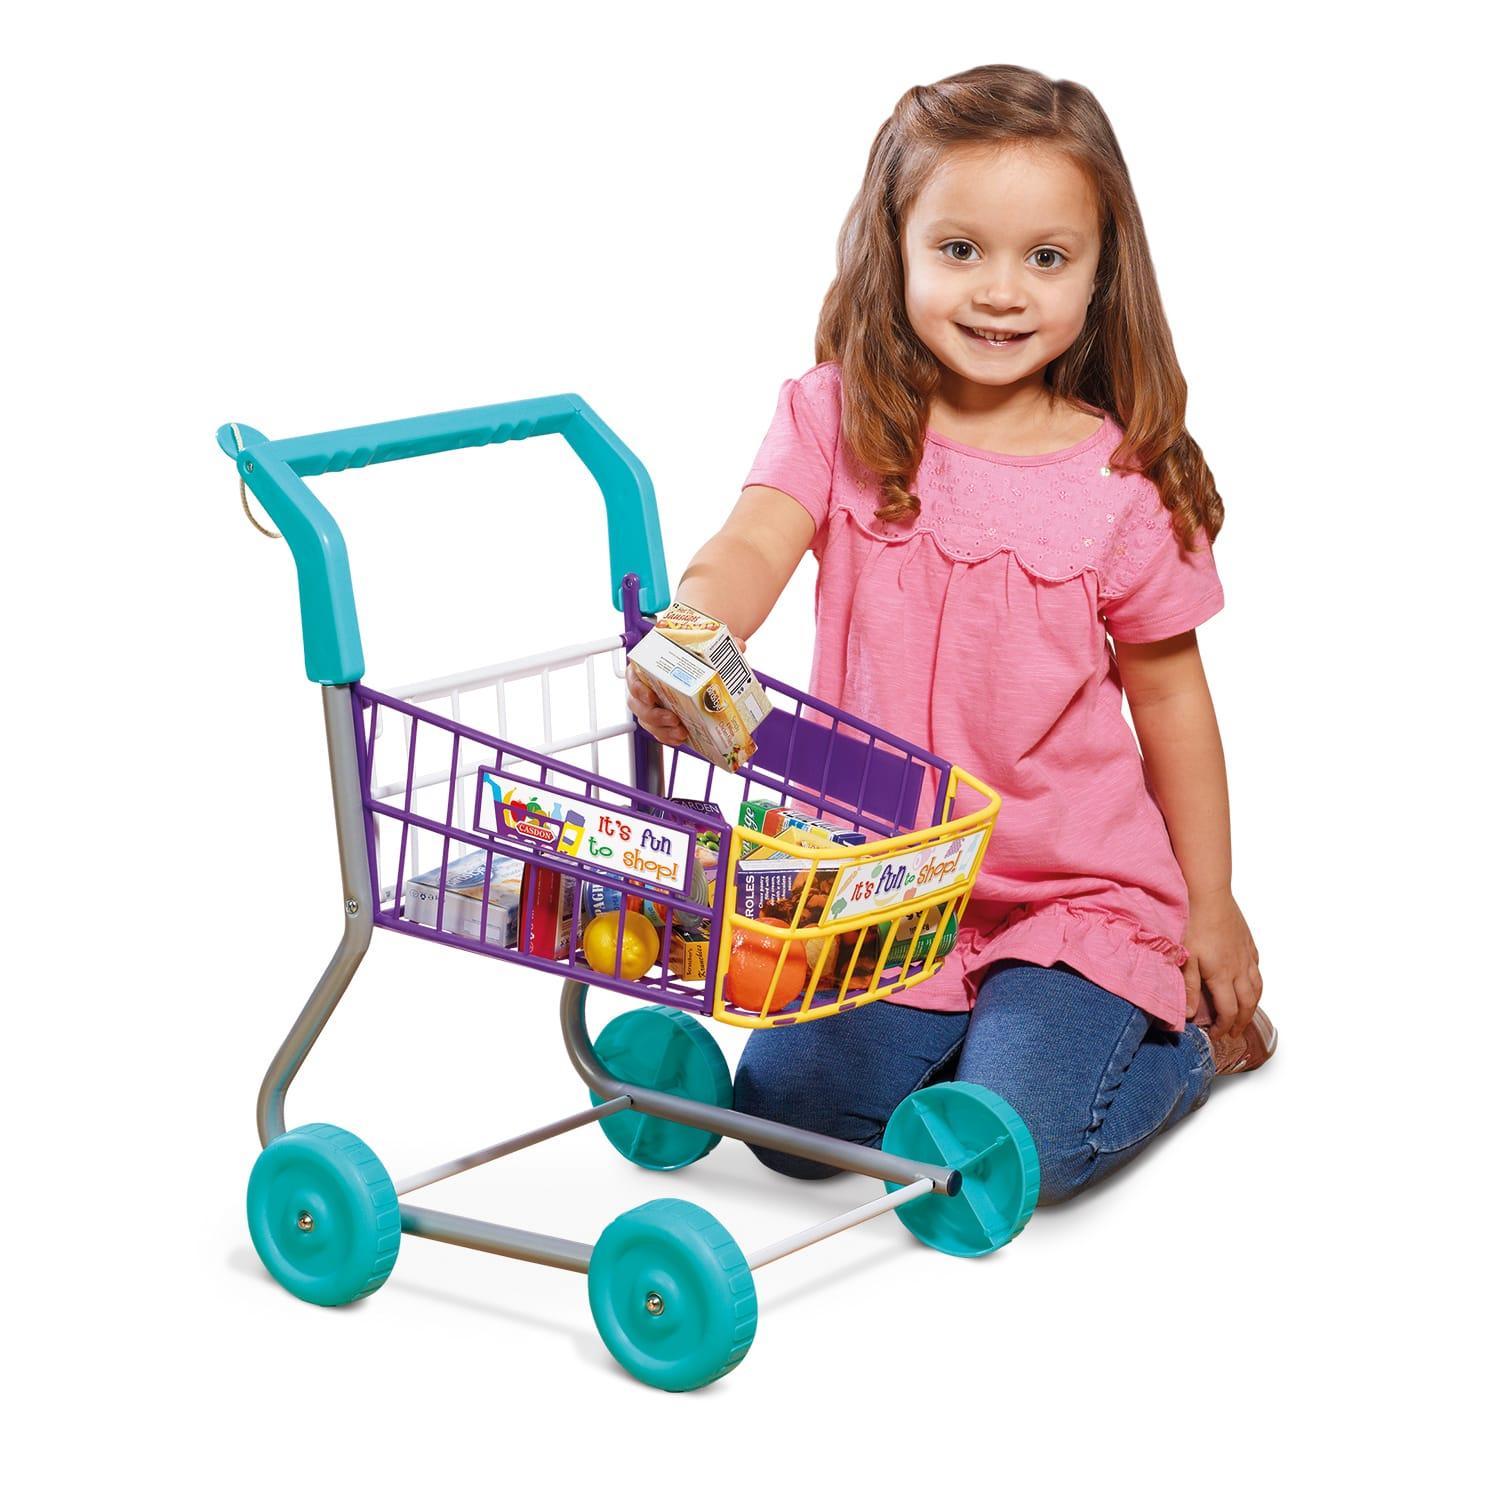 Toy Shopping Trolley with play food for 